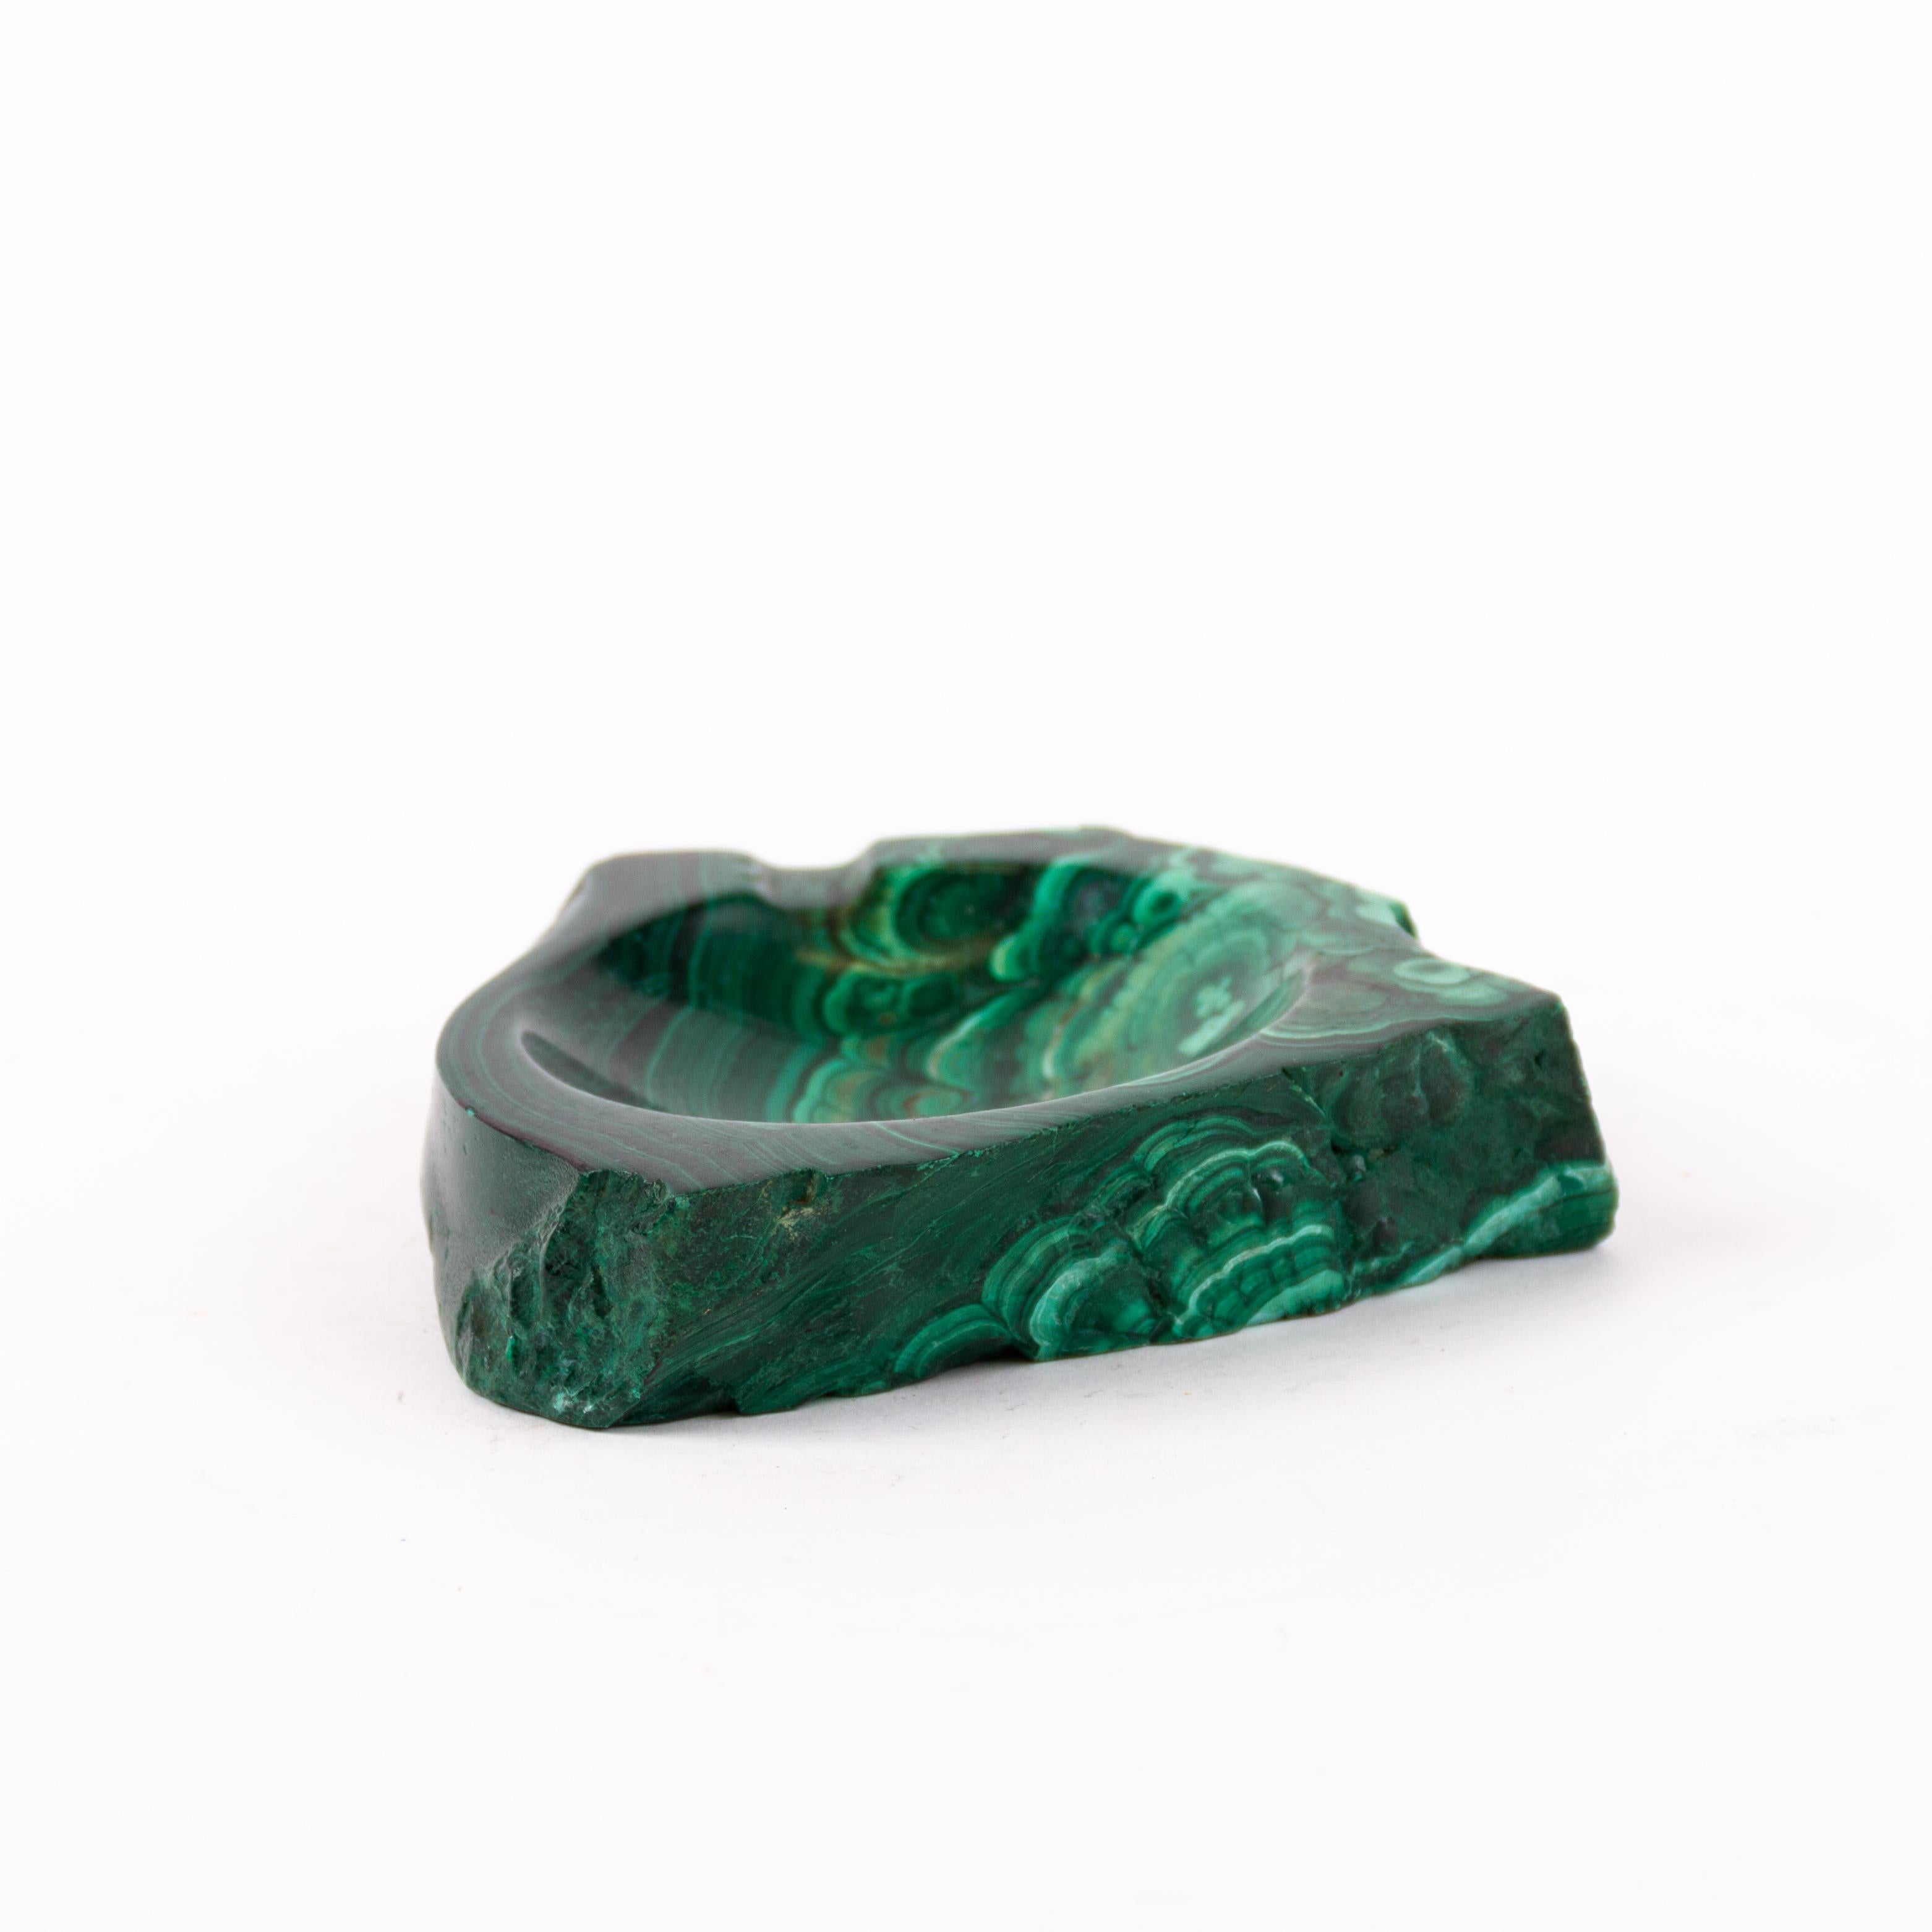 Italian Malachite Geode Specimen Mid Century Ashtray or Vide Poche 
Good condition overall, see photos.
From a private collection.

Free international shipping.